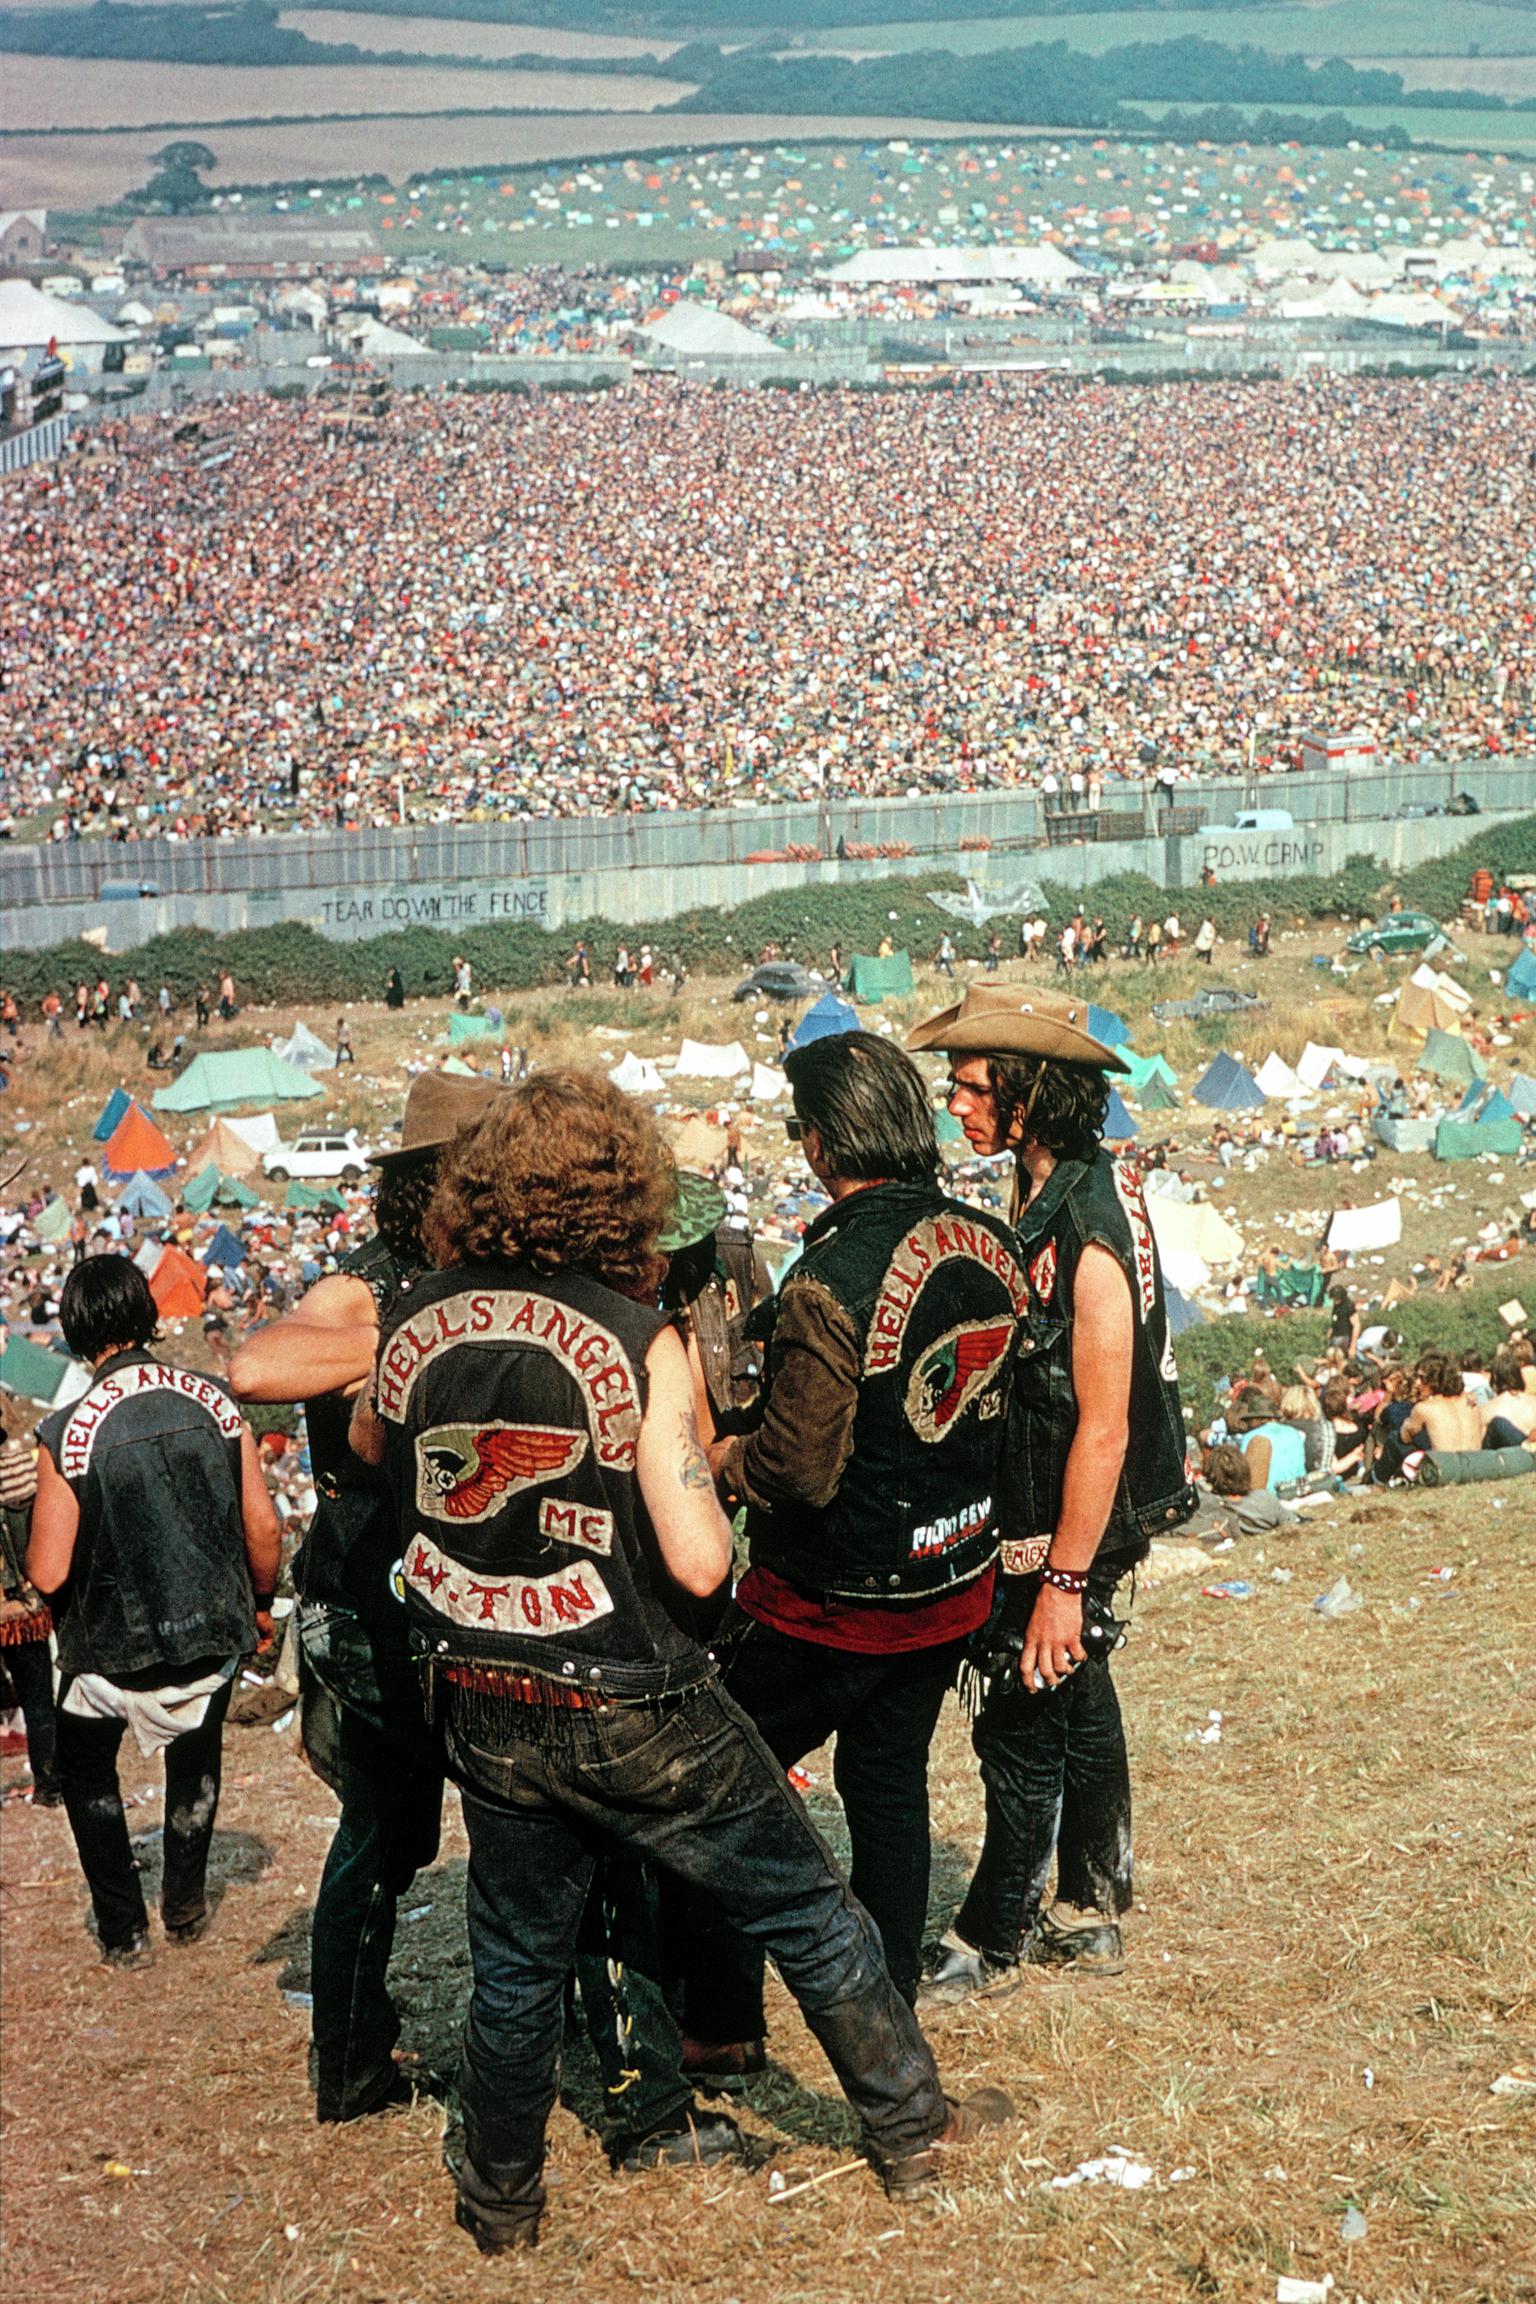 Isle of Wight Festival. A group of Hells Angels, relegated from their usual role of security, stand lonely aloof from the festival